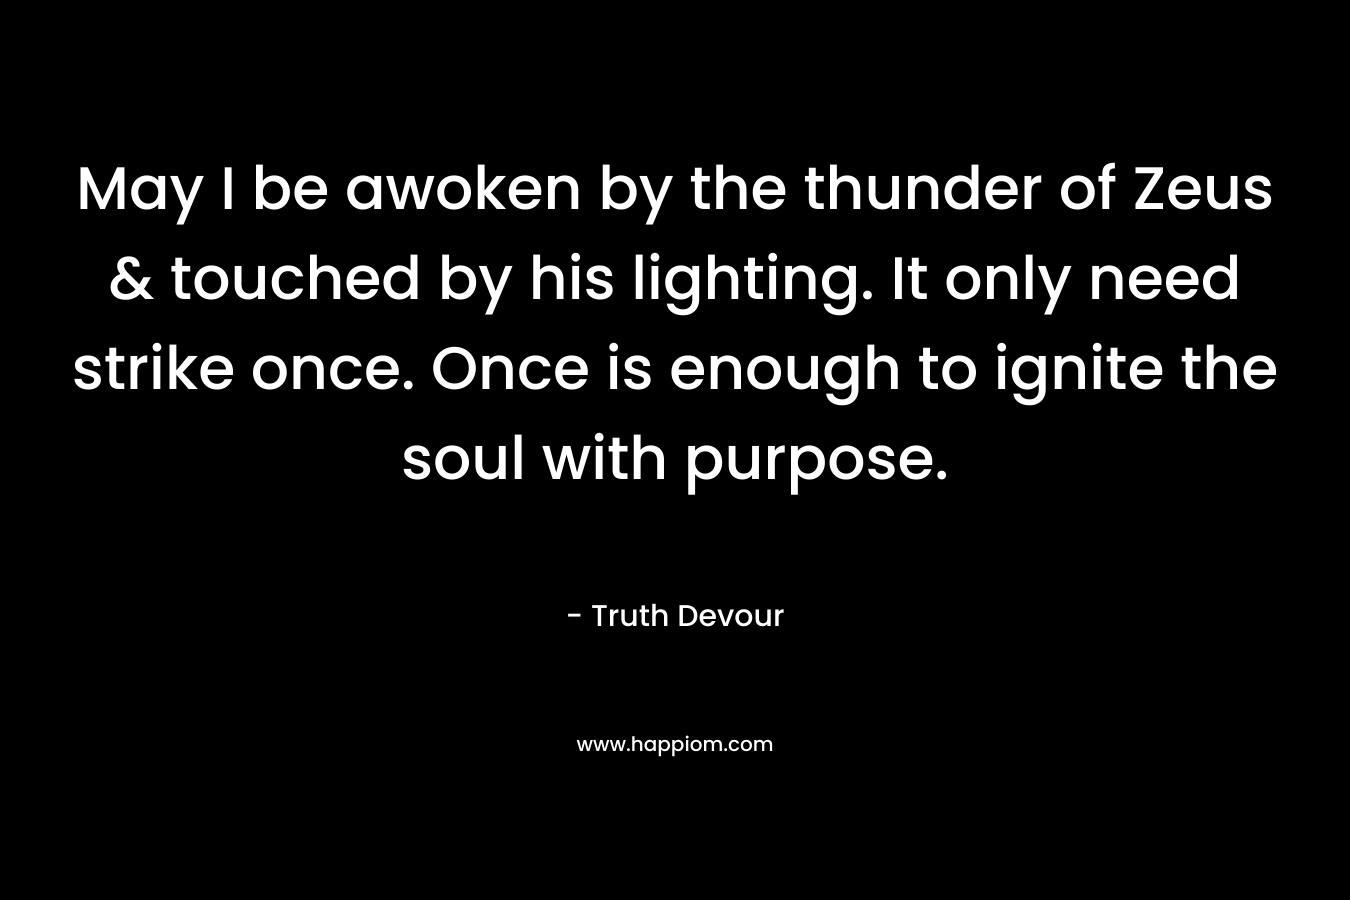 May I be awoken by the thunder of Zeus & touched by his lighting. It only need strike once. Once is enough to ignite the soul with purpose.